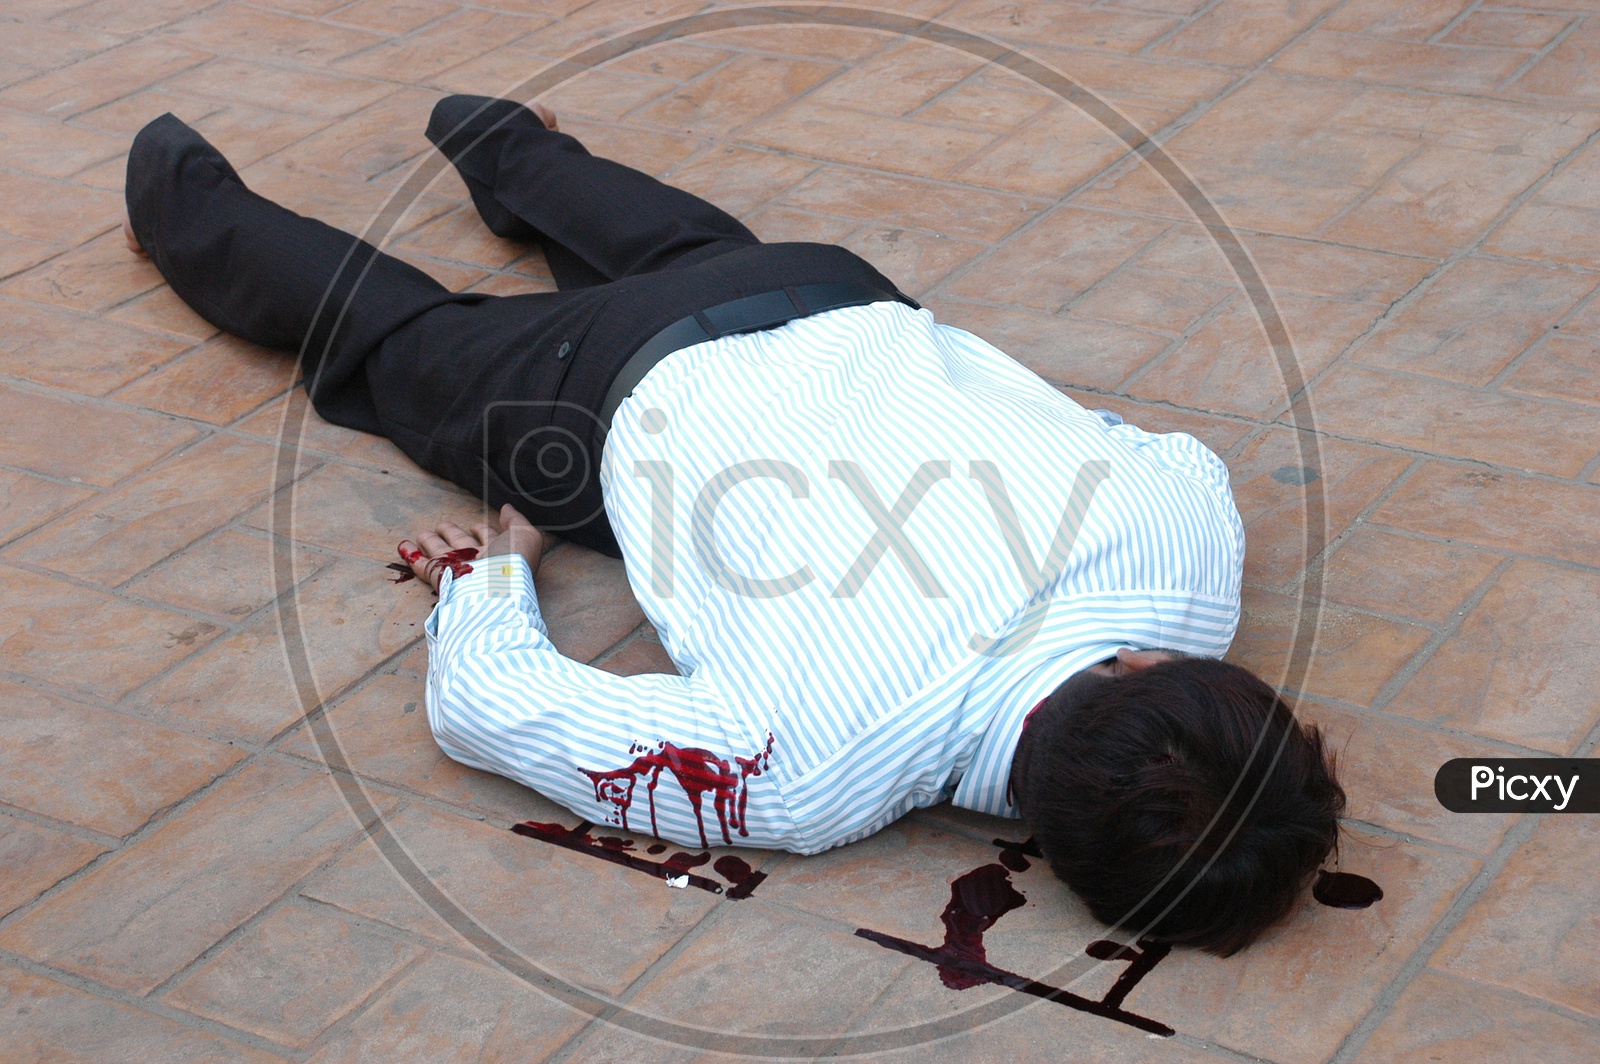 A dead man on the floor with blood stains - Movie scene